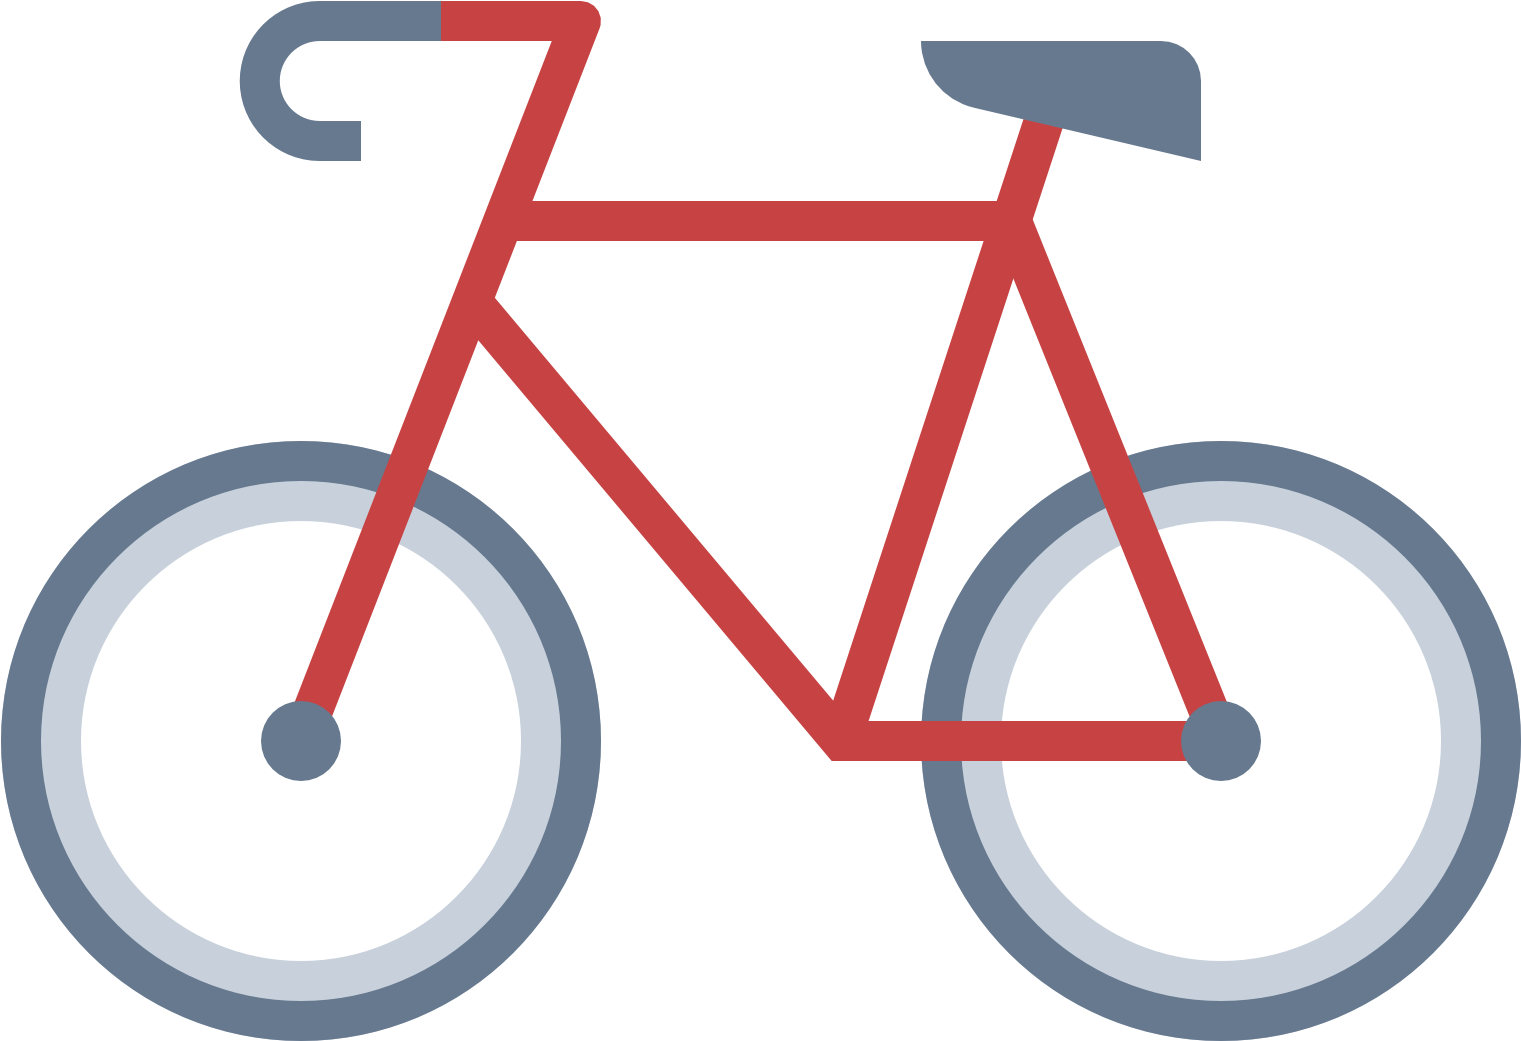 About Us - Transparent Background Bicycle Icon (1600x1600)